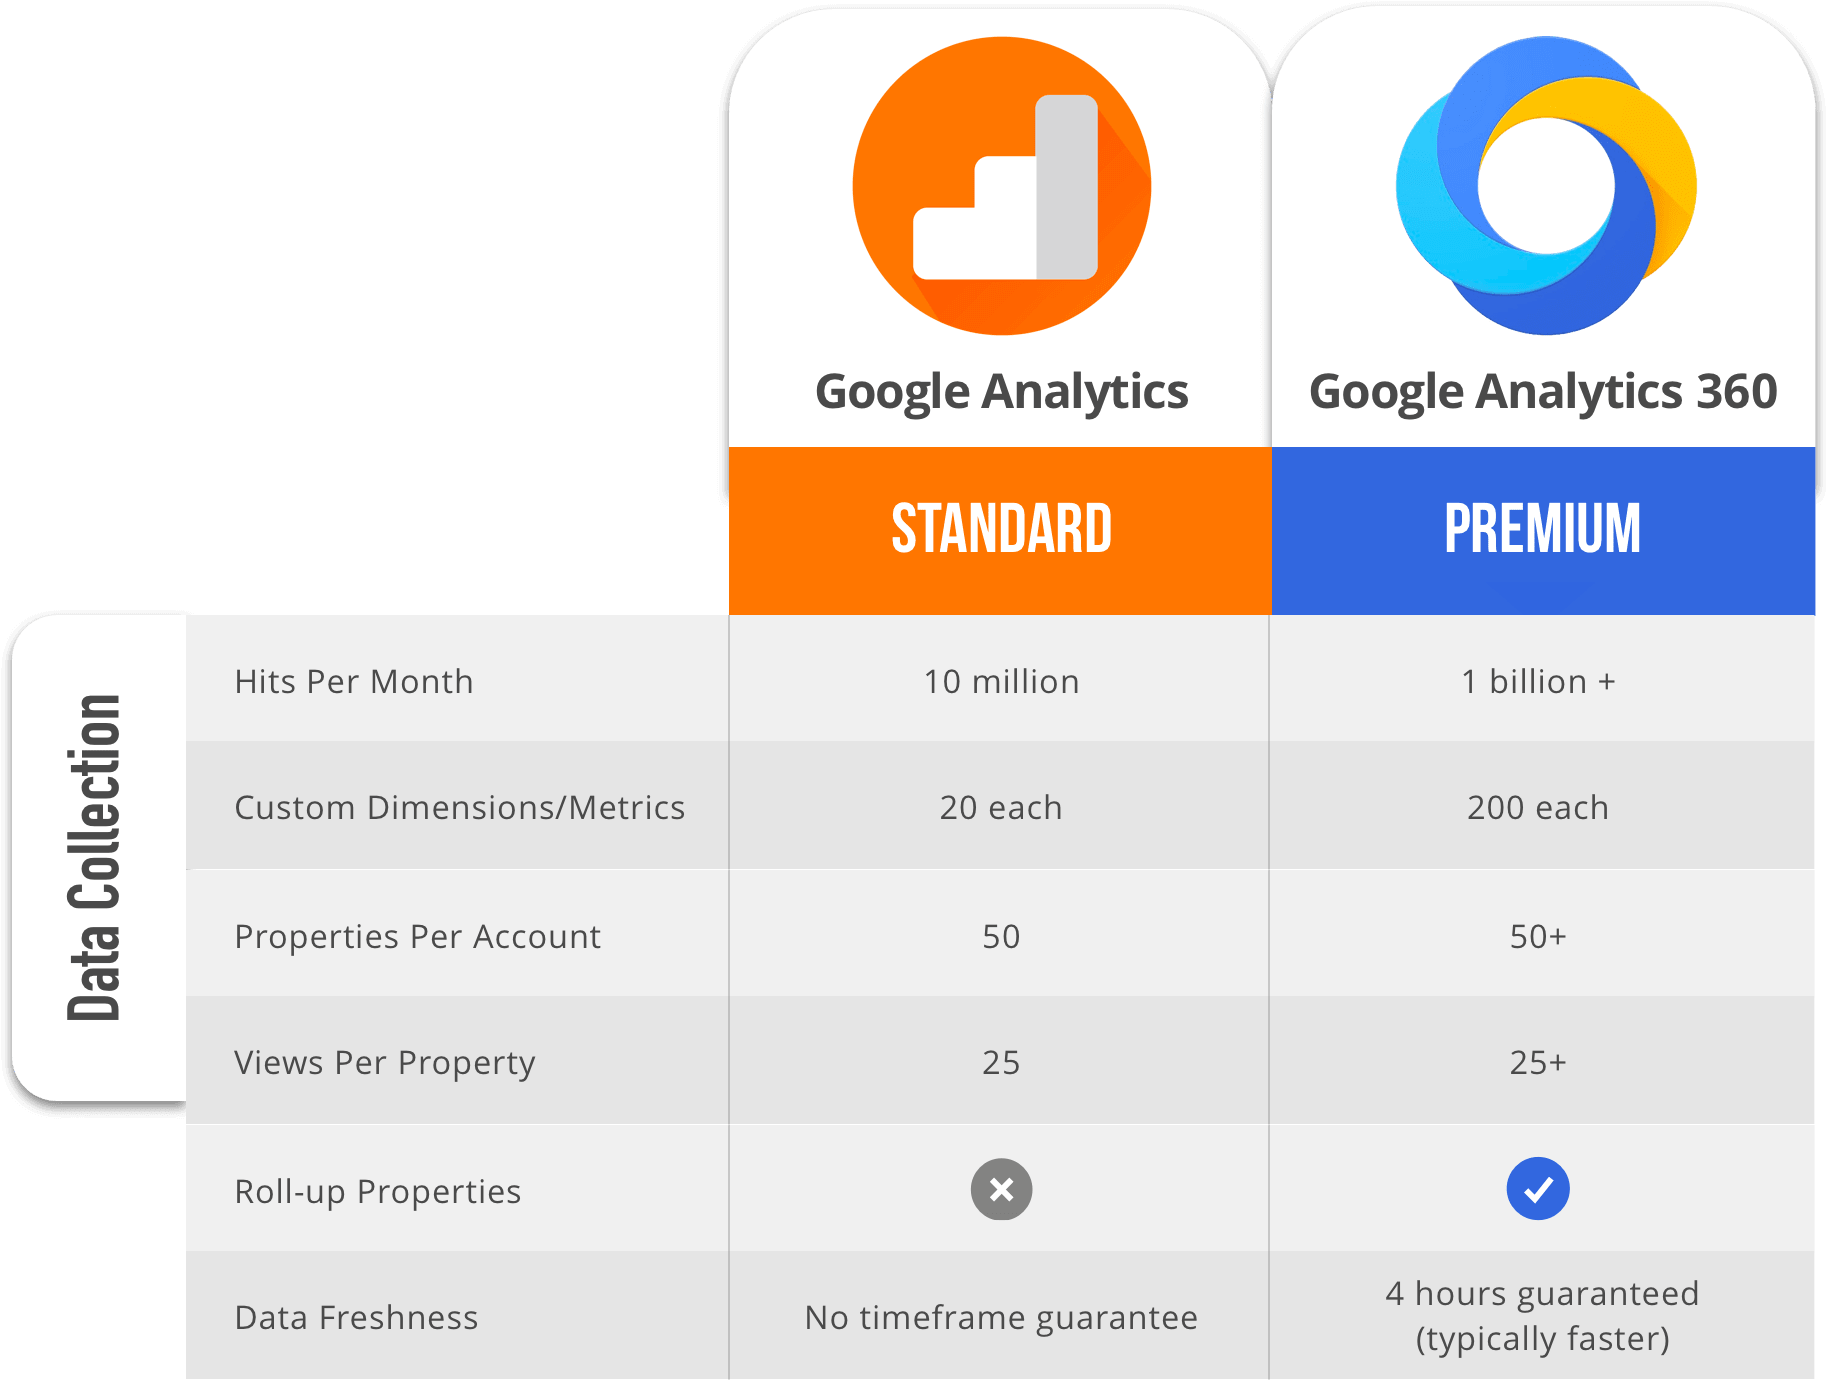 What is the difference between Google Analytics free and Google Analytics 360?